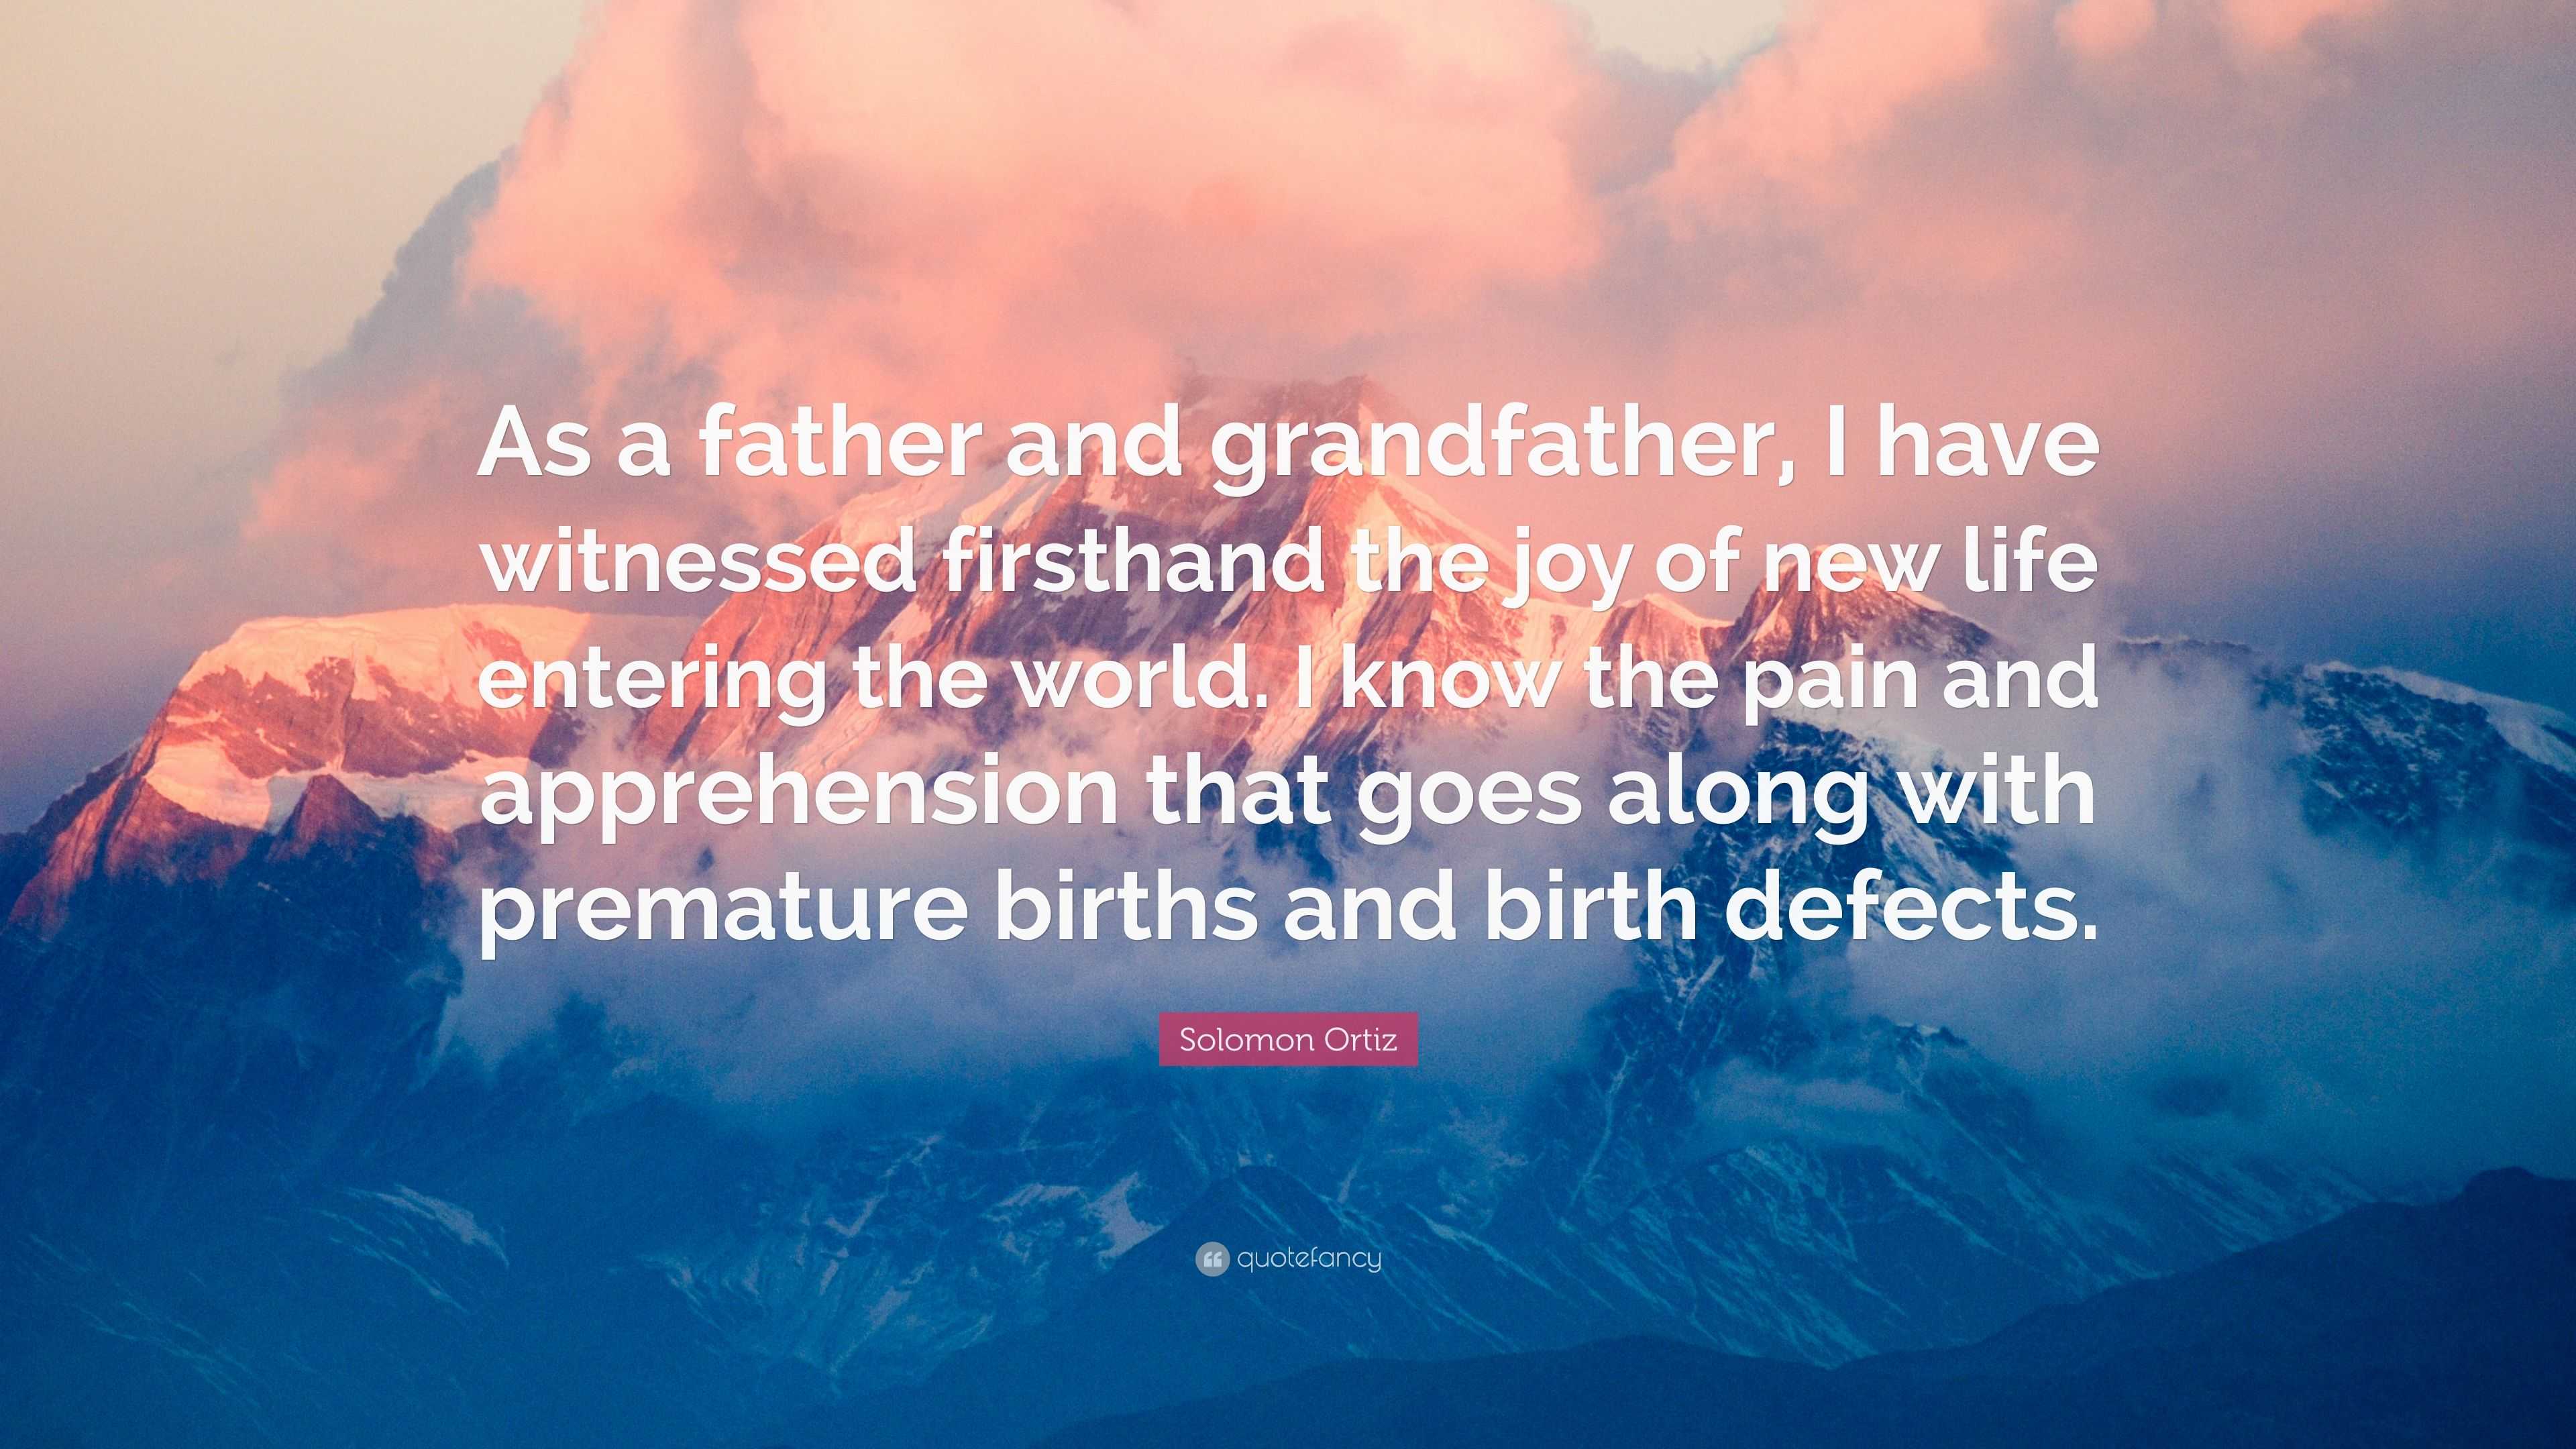 Solomon Ortiz Quote “As a father and grandfather I have witnessed firsthand the